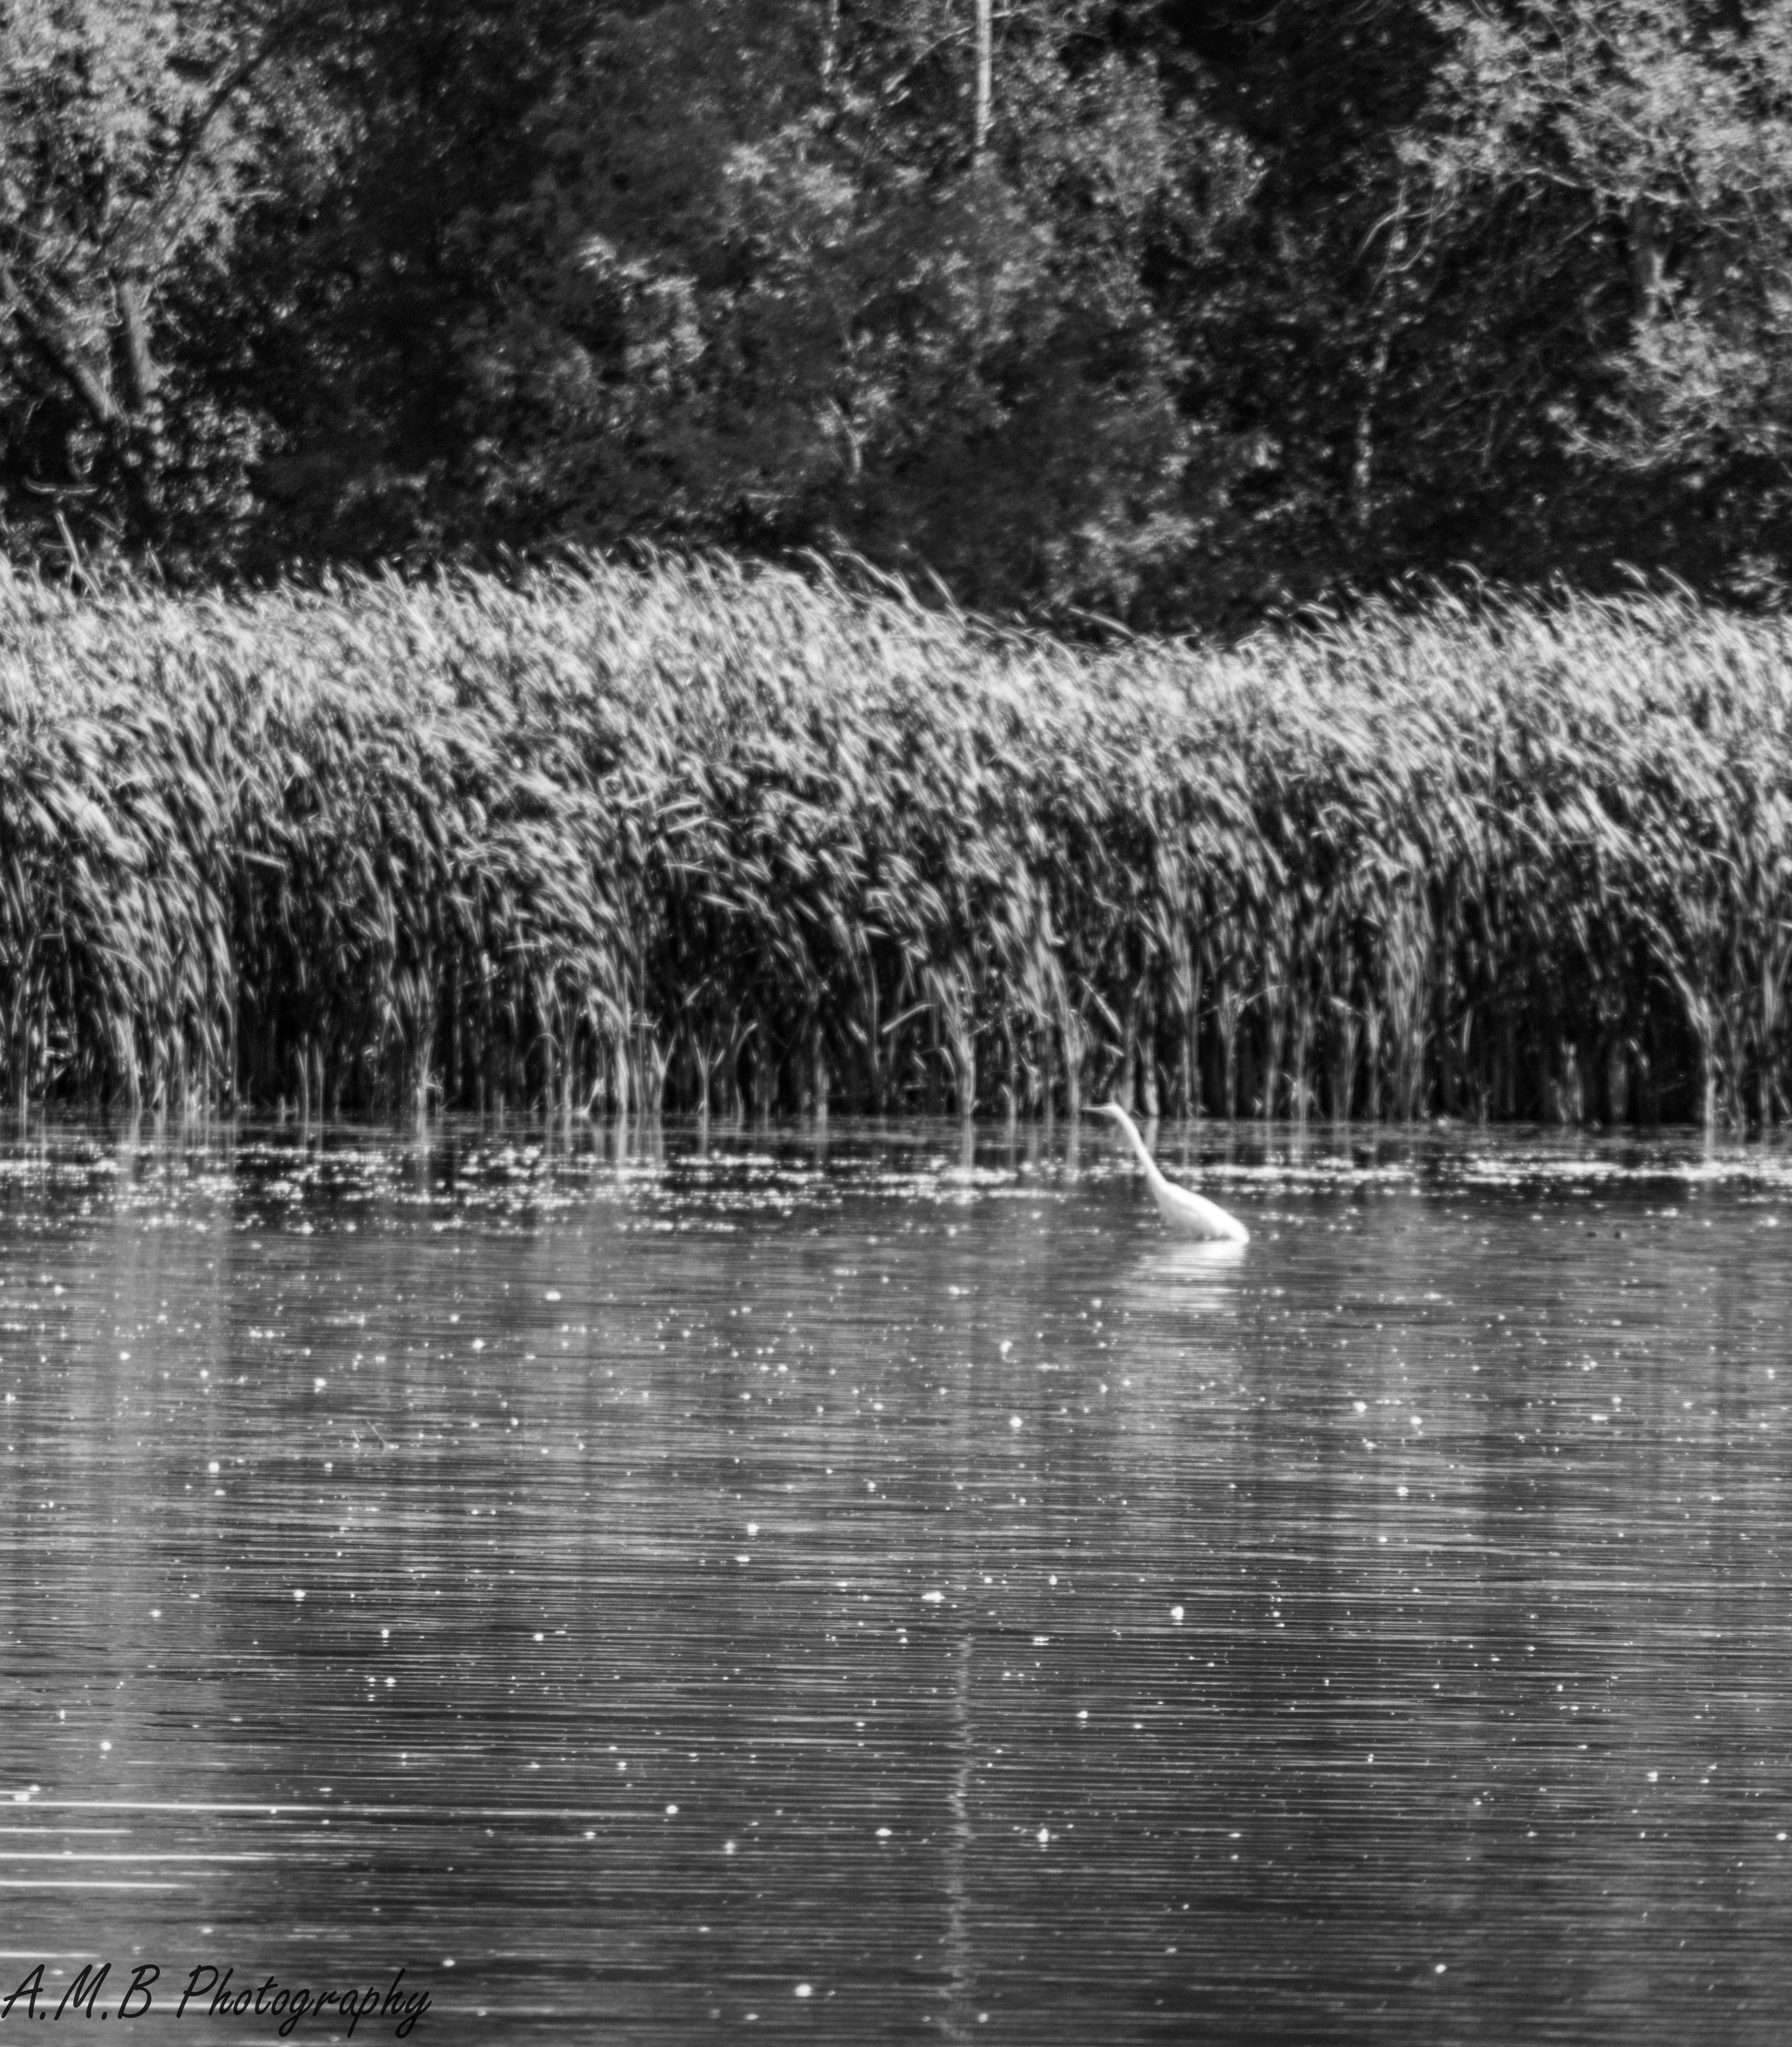 Great White Heron in Busse Woods